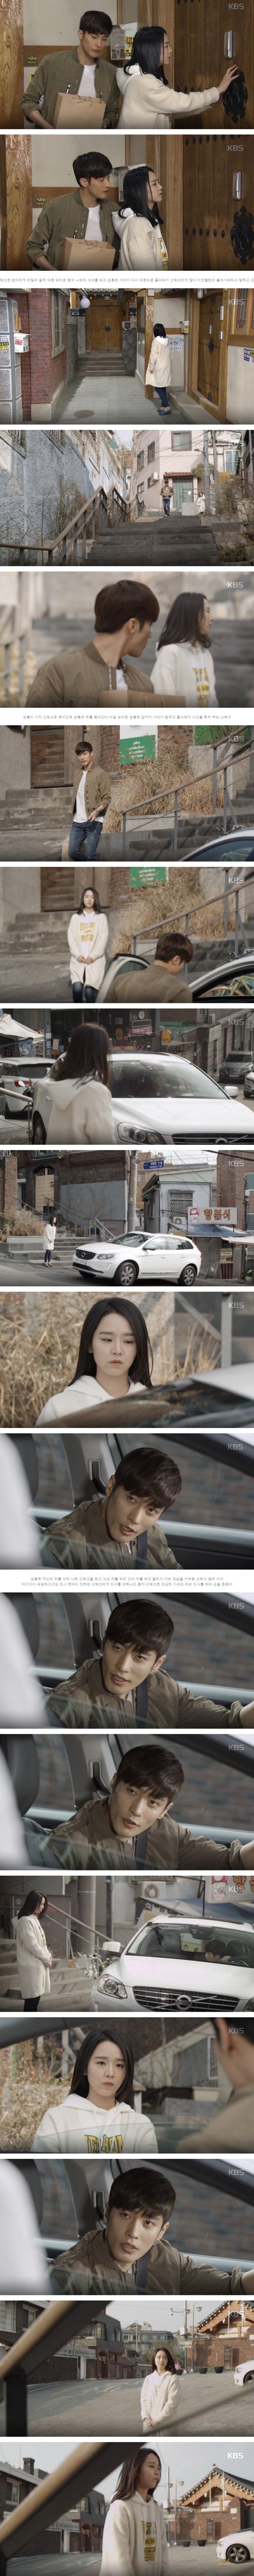 episodes 13 and 14 captures for the Korean drama 'Five Children'